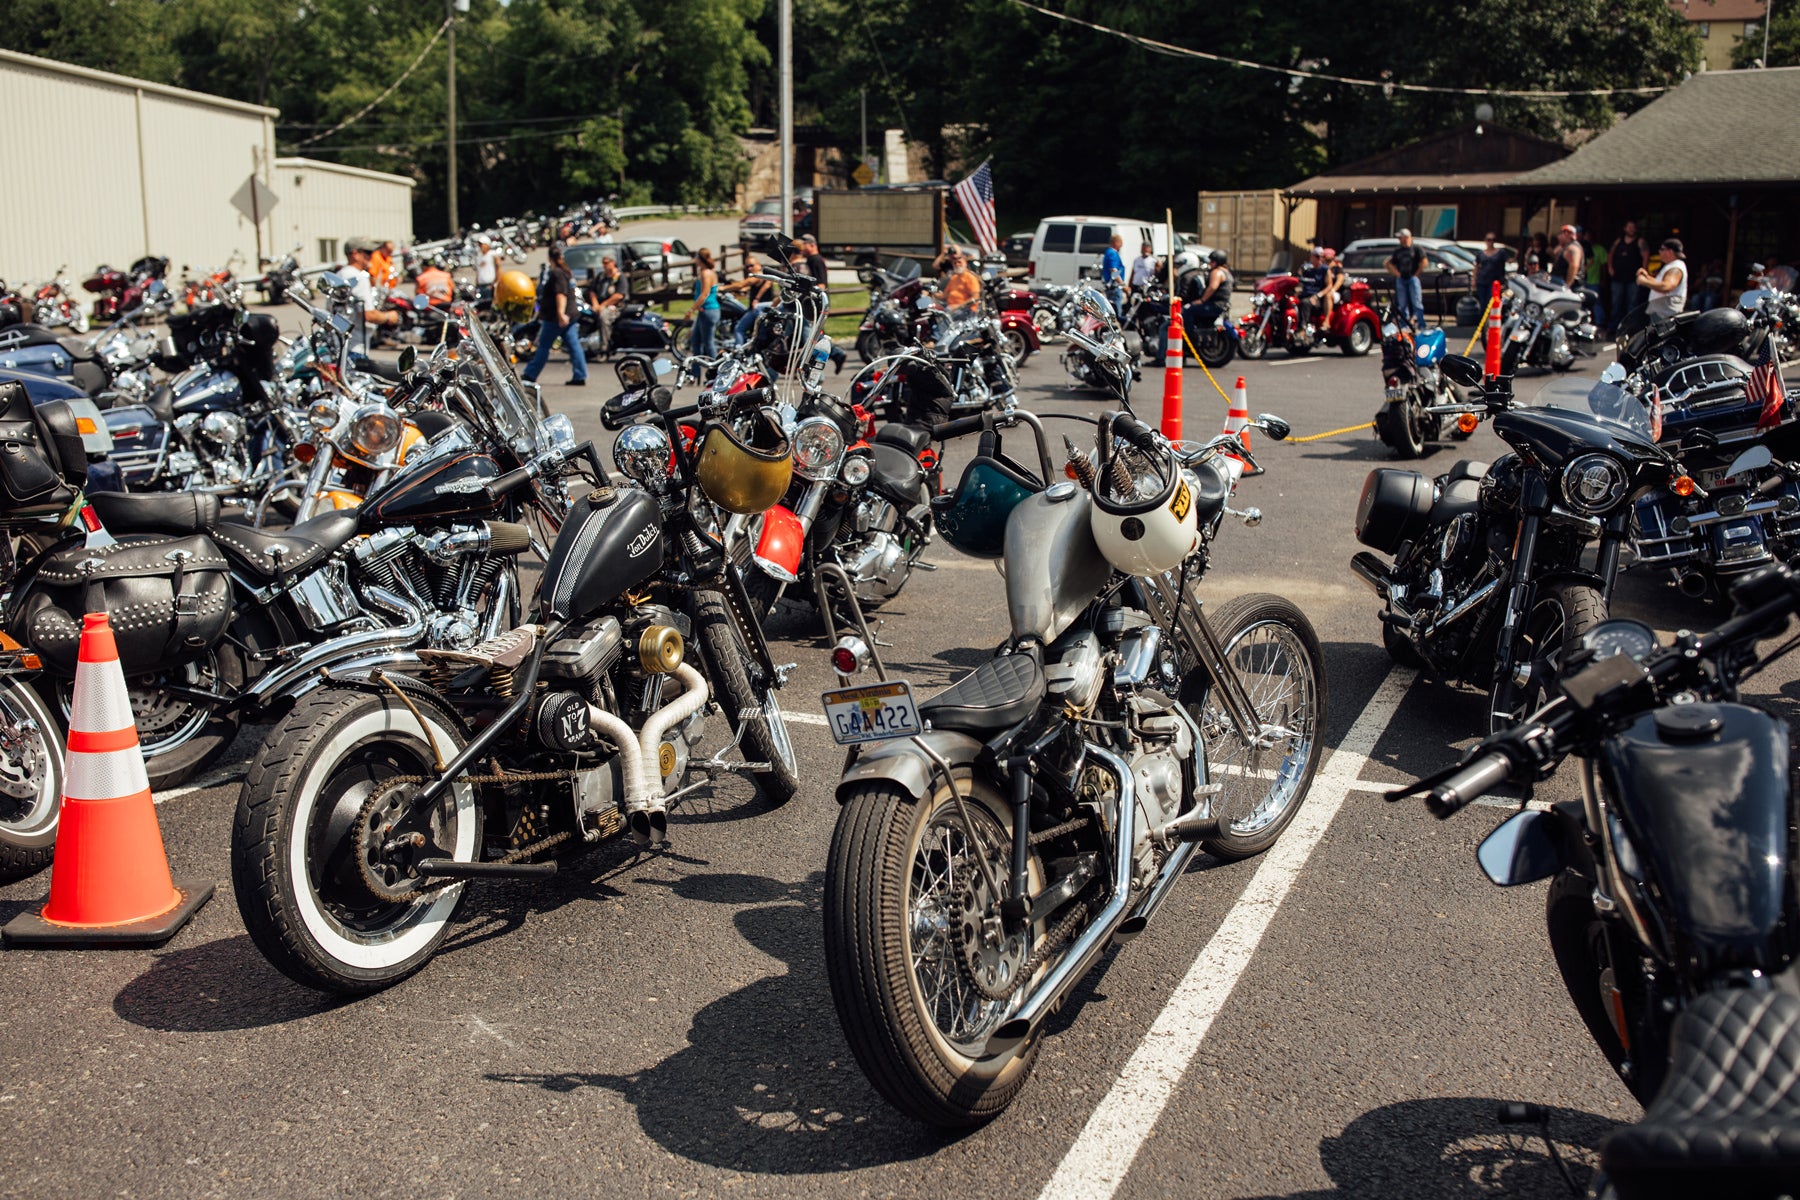 Pittsburgh Moto Summer Outpost RideOut Motorcycle Event